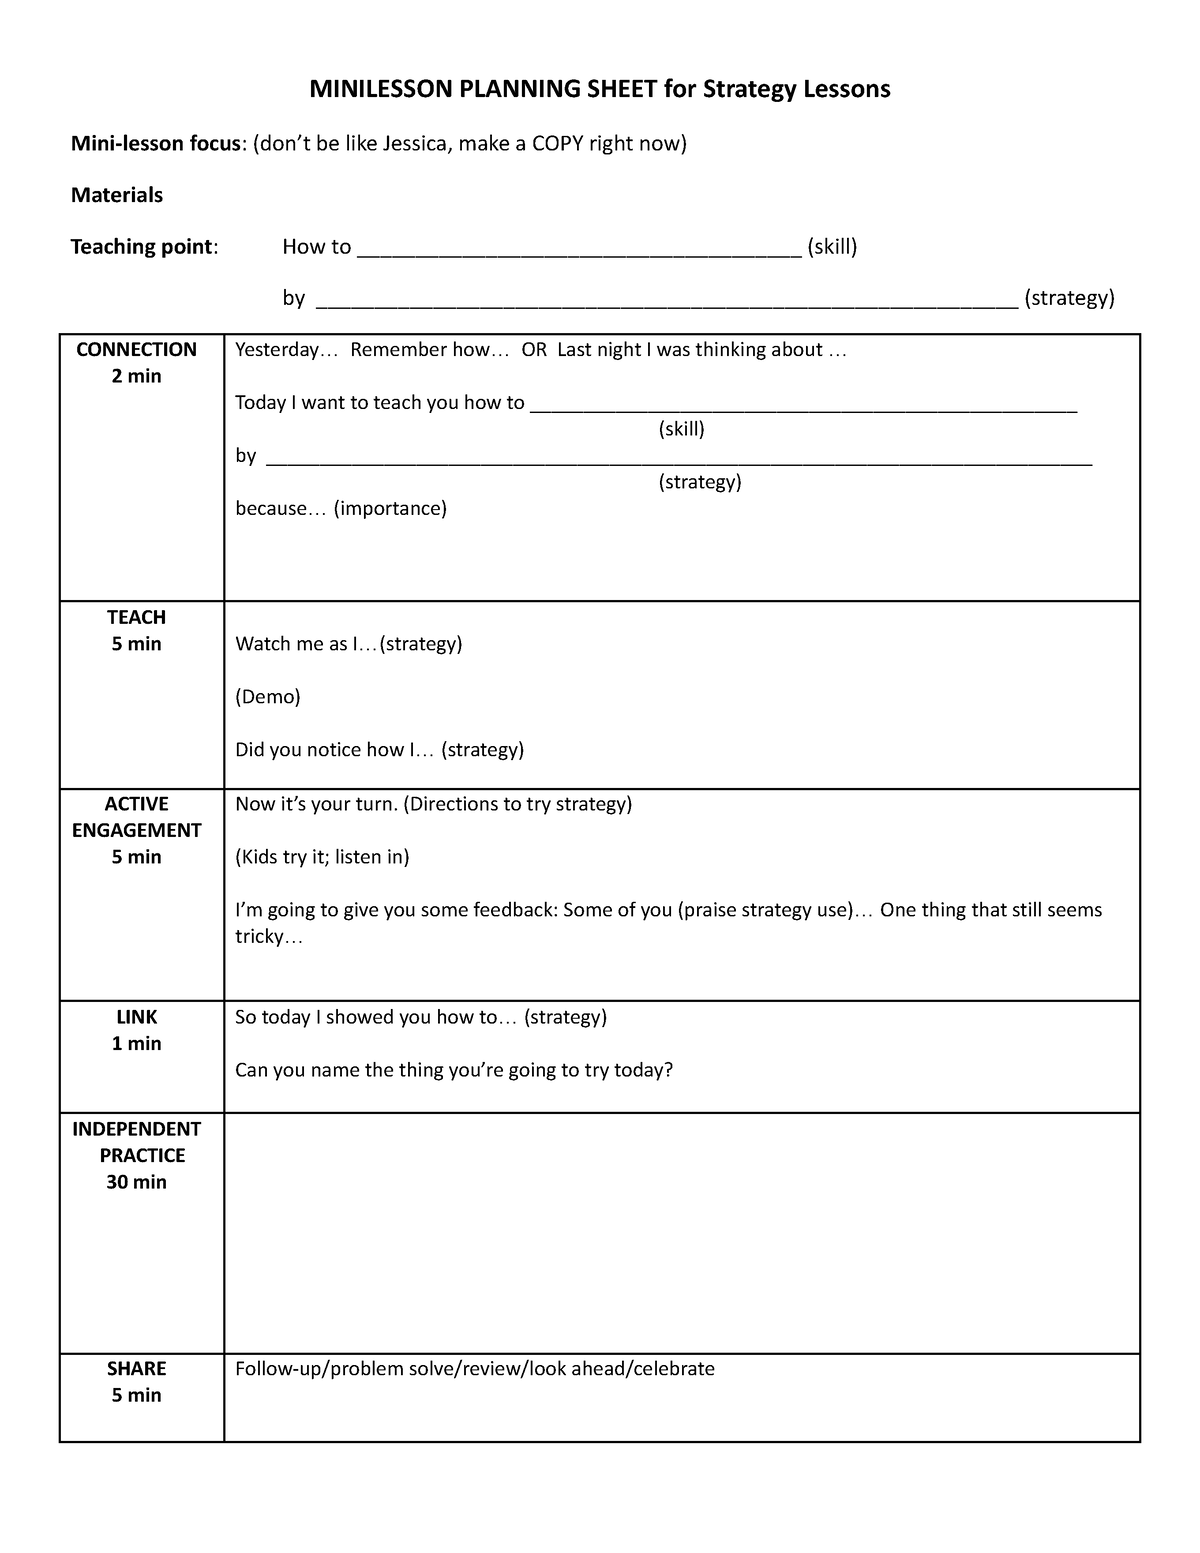 Minilesson Planning Sheet - MINILESSON PLANNING SHEET for Strategy ...